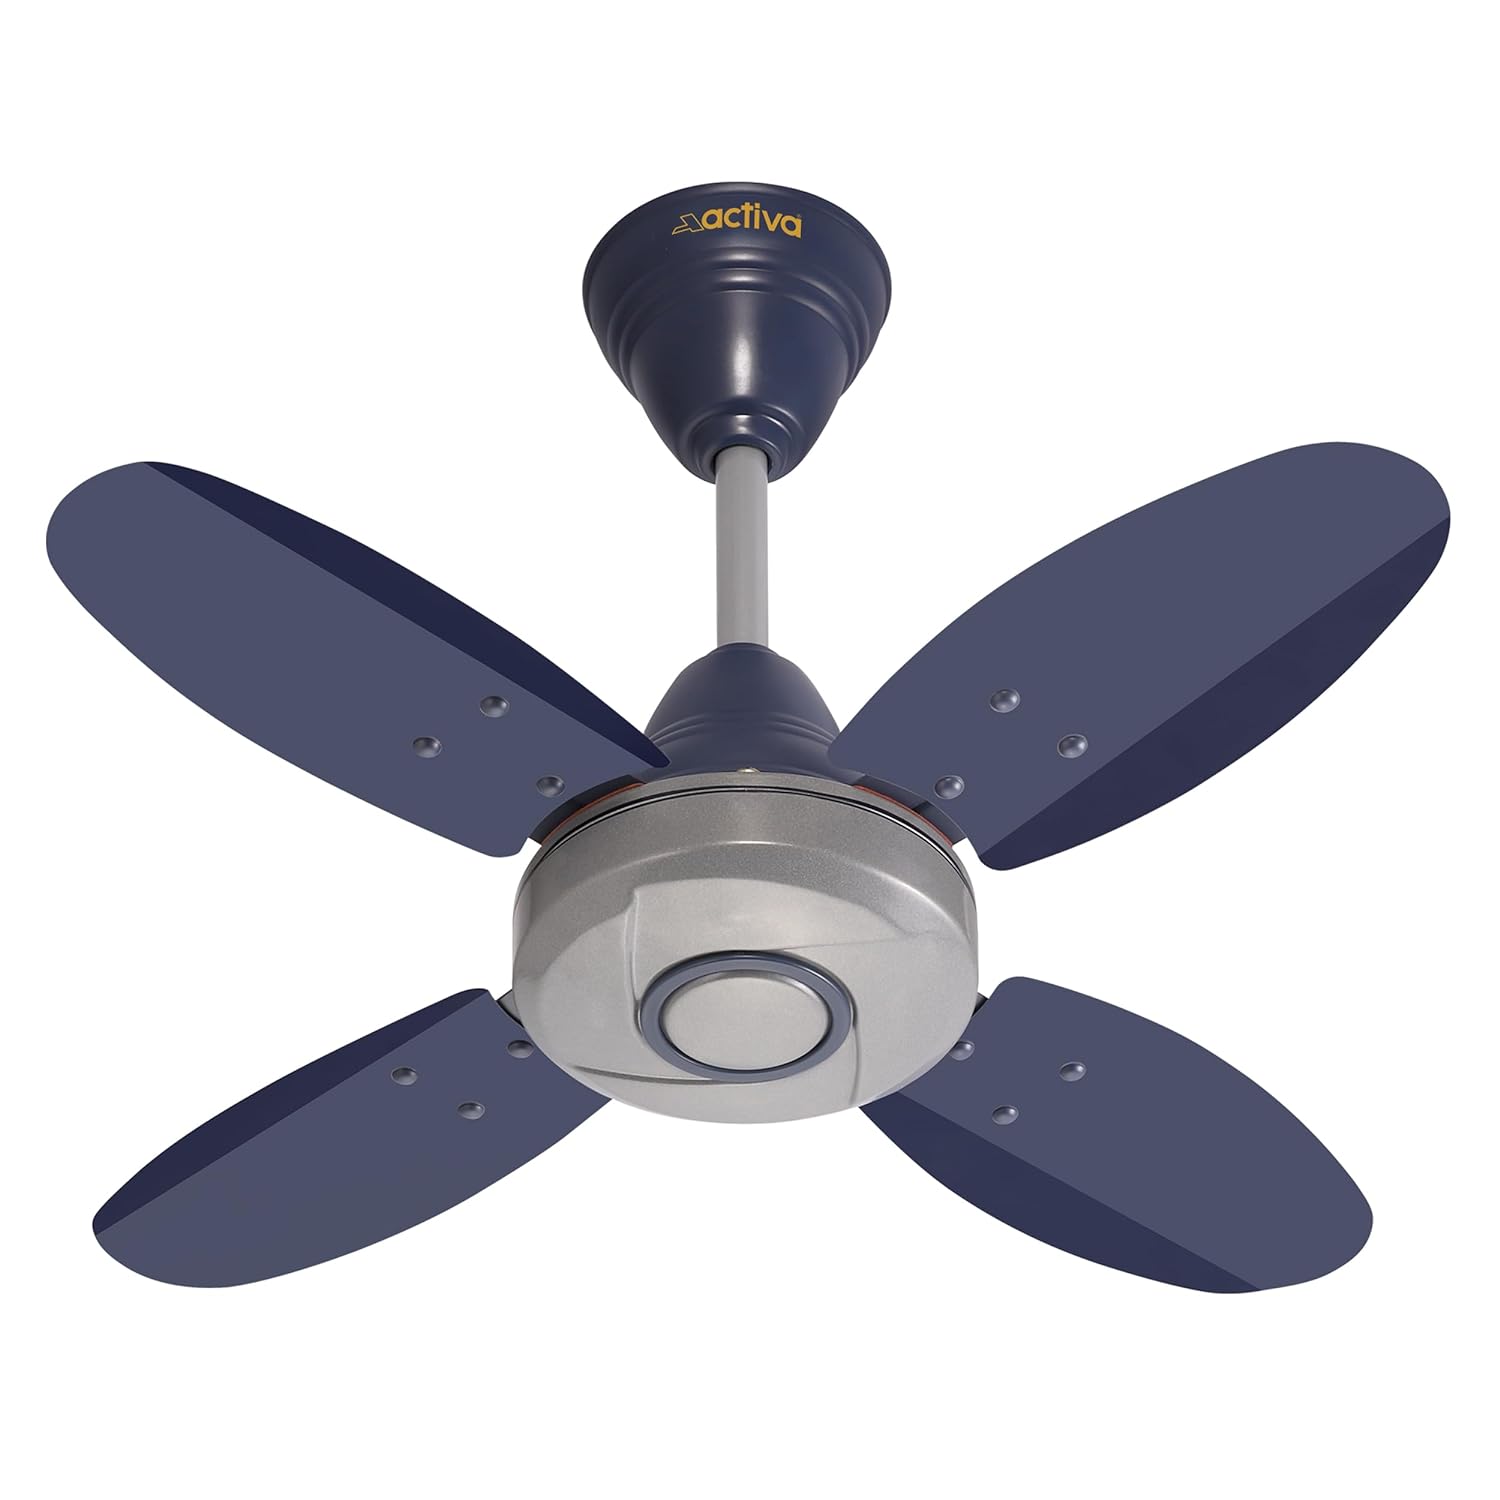 ACTIVA ORNET High Speed 850 RPM 4 Blades -offers & Discounts- 